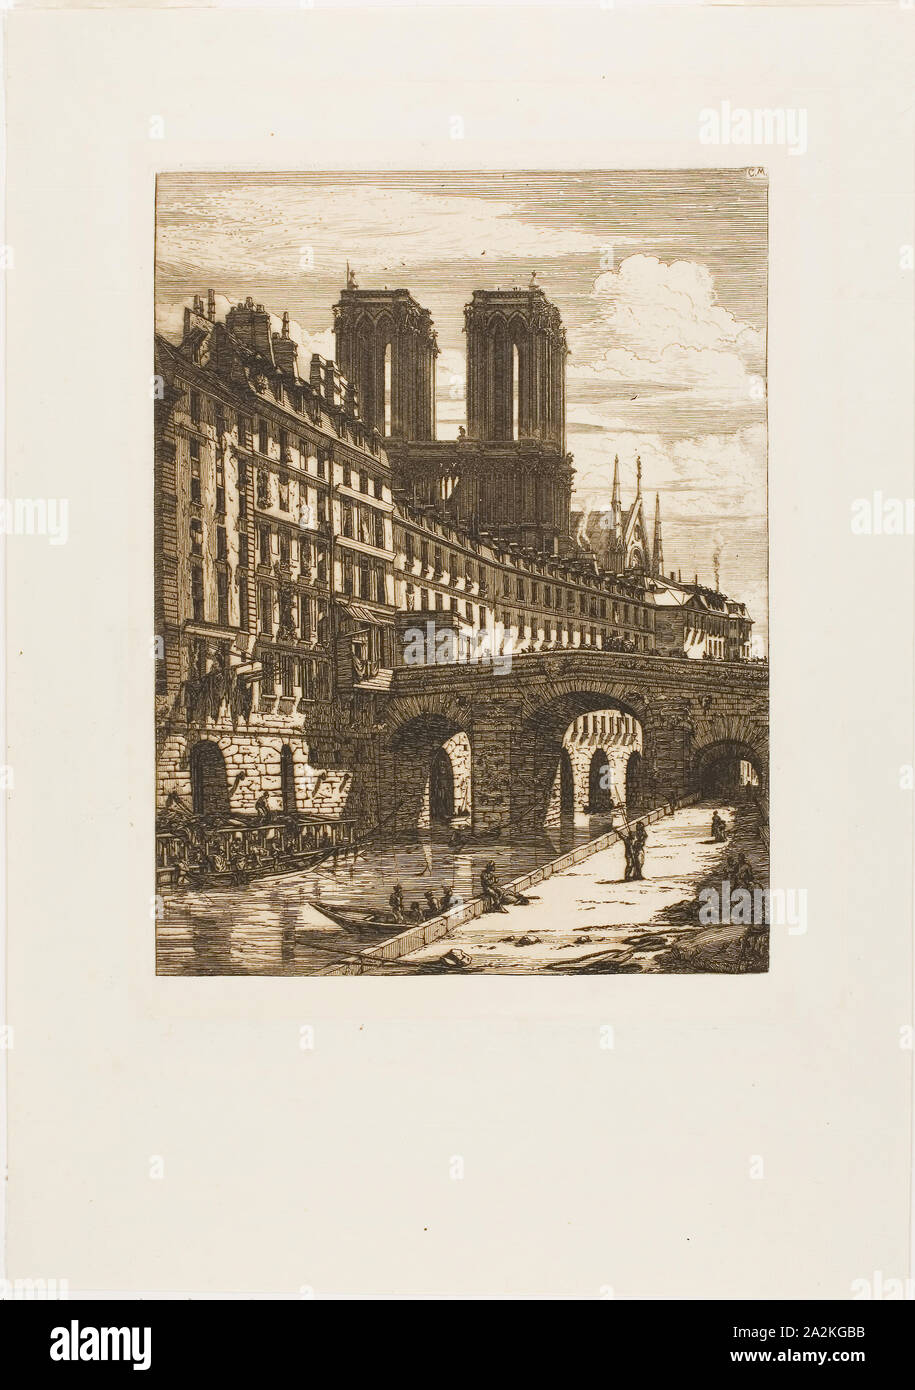 Le Petit Pont, Paris, 1850, Charles Meryon, French, 1821-1868, France, Etching and engraving in dark brown on ivory laid paper, 246 × 186 mm (image), 261 × 190 mm (plate), 391 × 275 mm (sheet Stock Photo